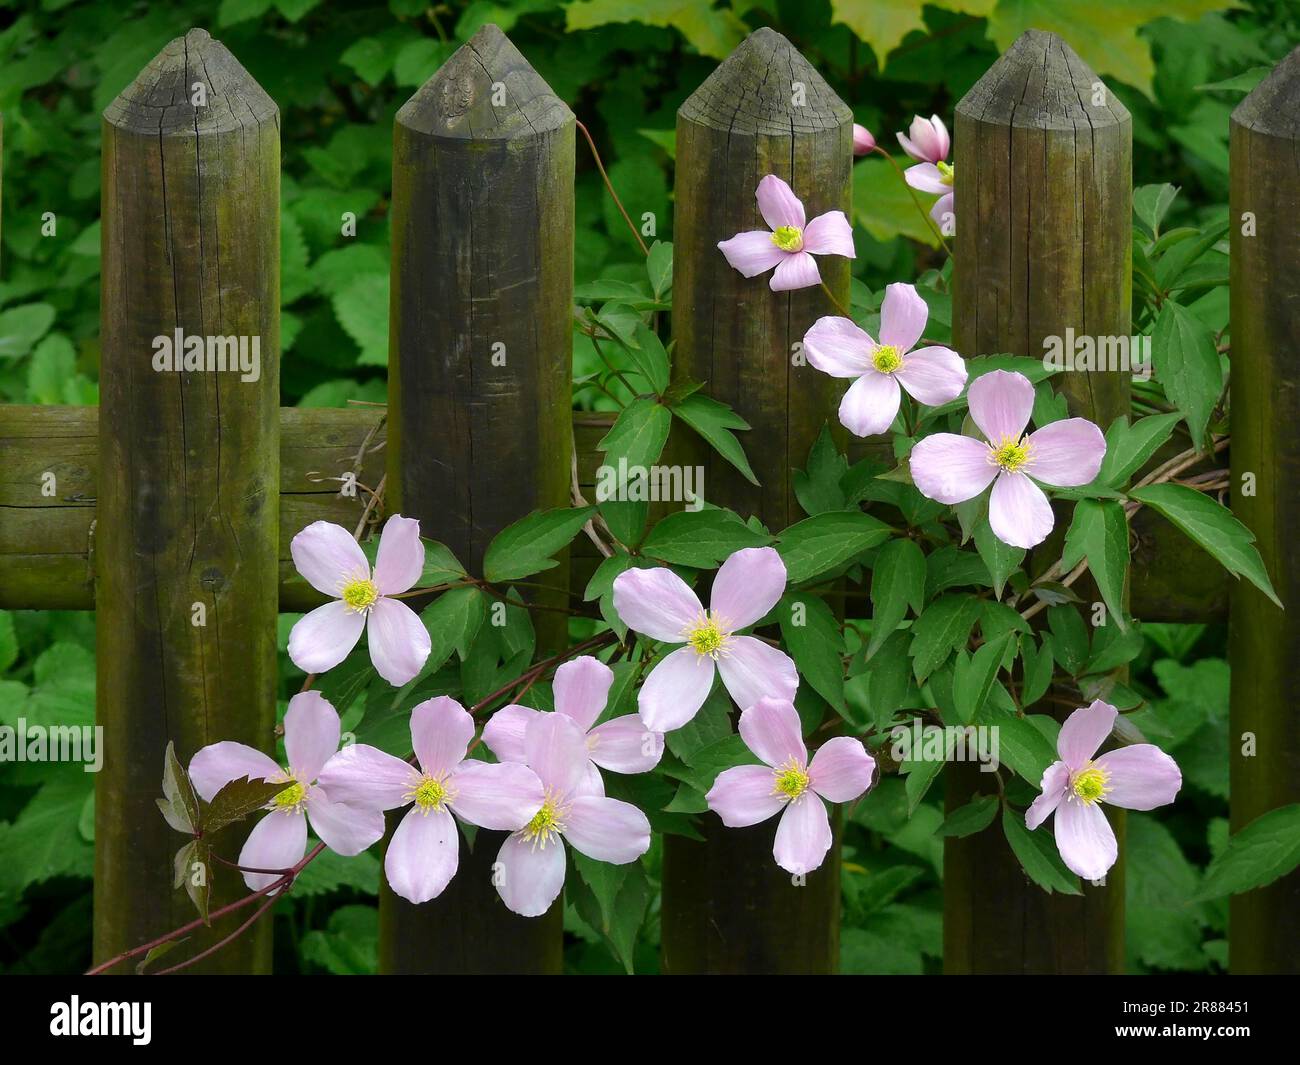 Clematises (Clematis) flowering by the garden fence, woodland vine, also Clematis Stock Photo